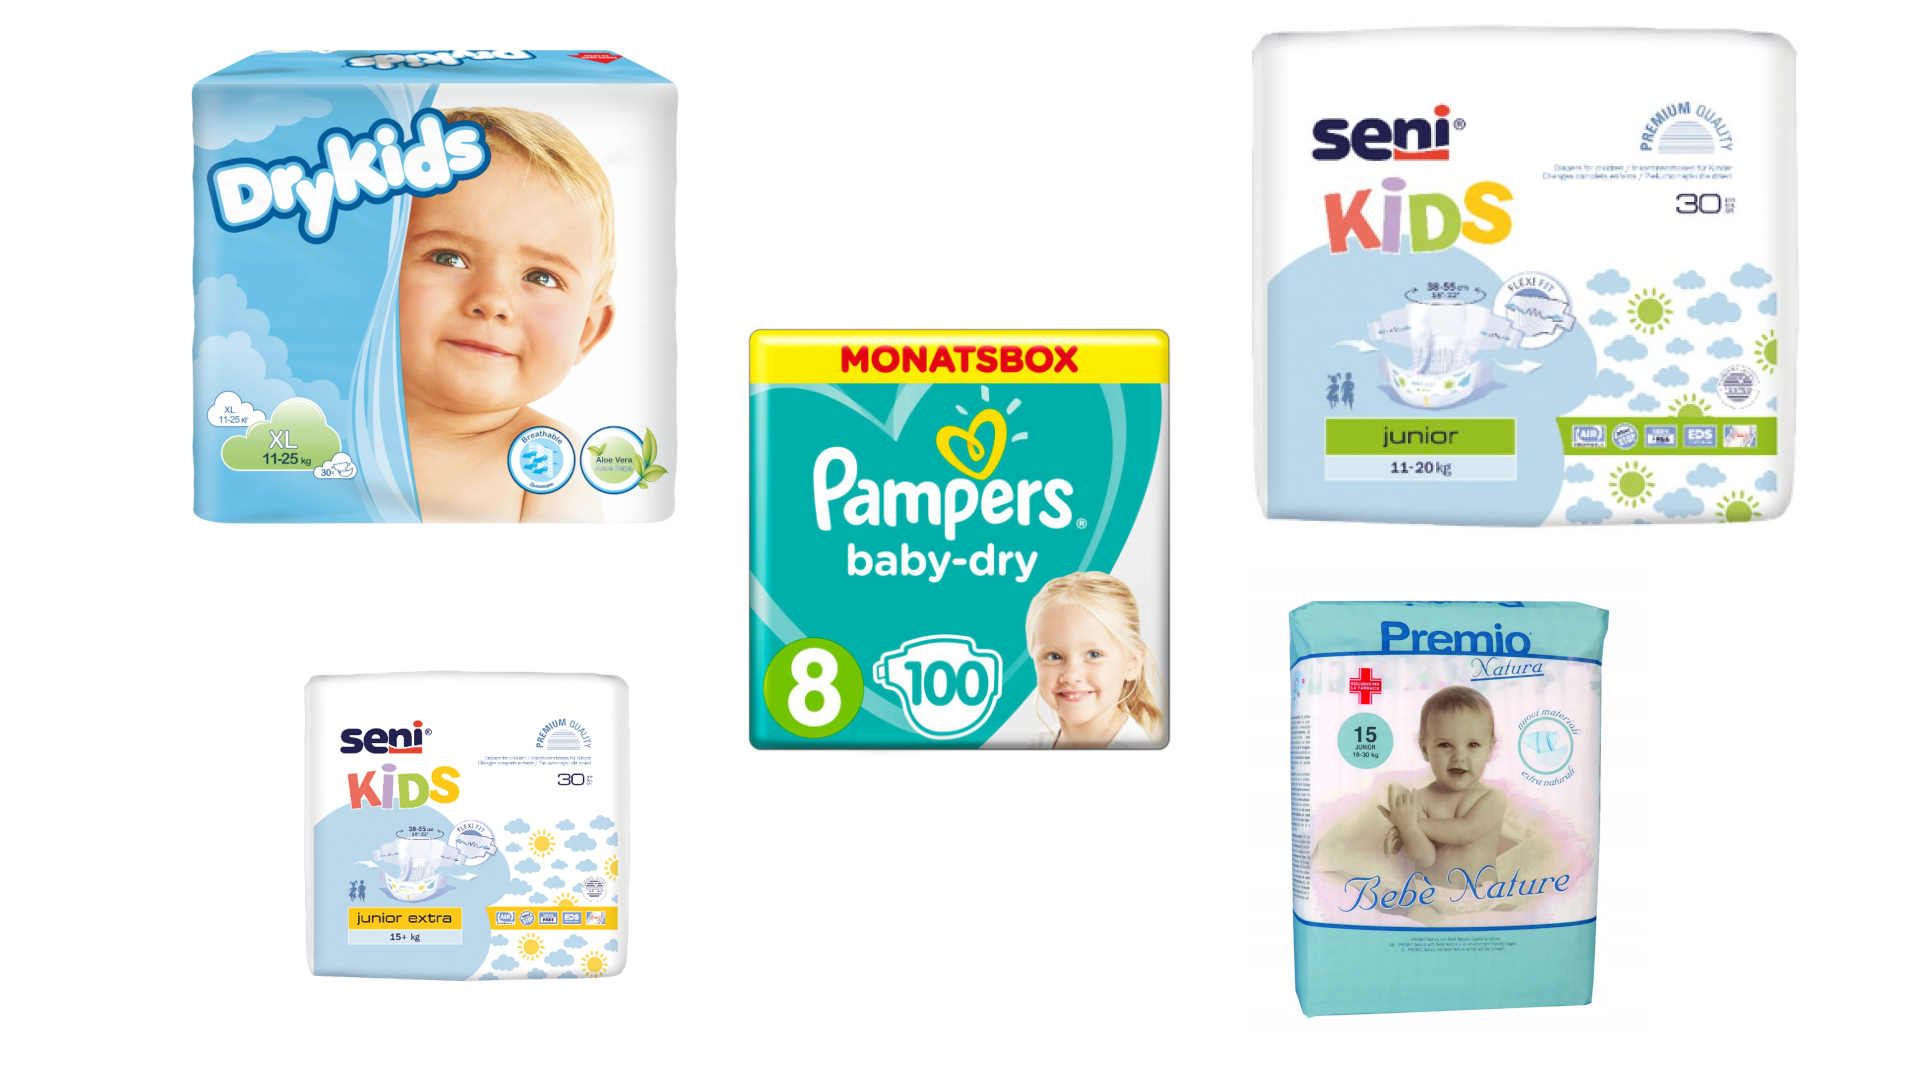 windeln pampers 3